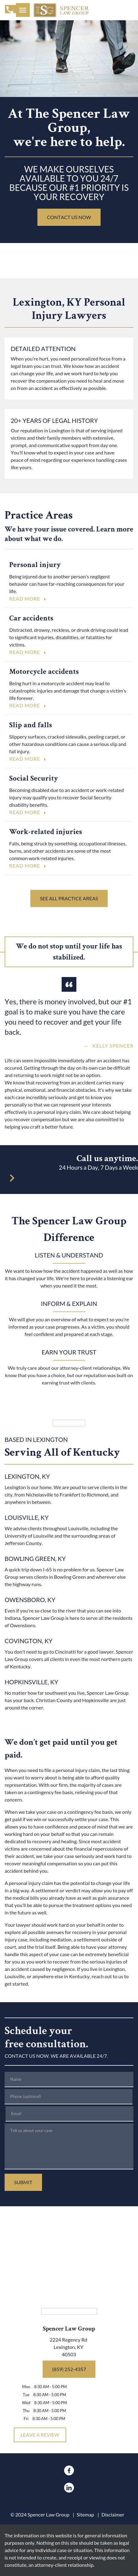 Spencer Kelly P Law Office - Lexington KY Lawyers